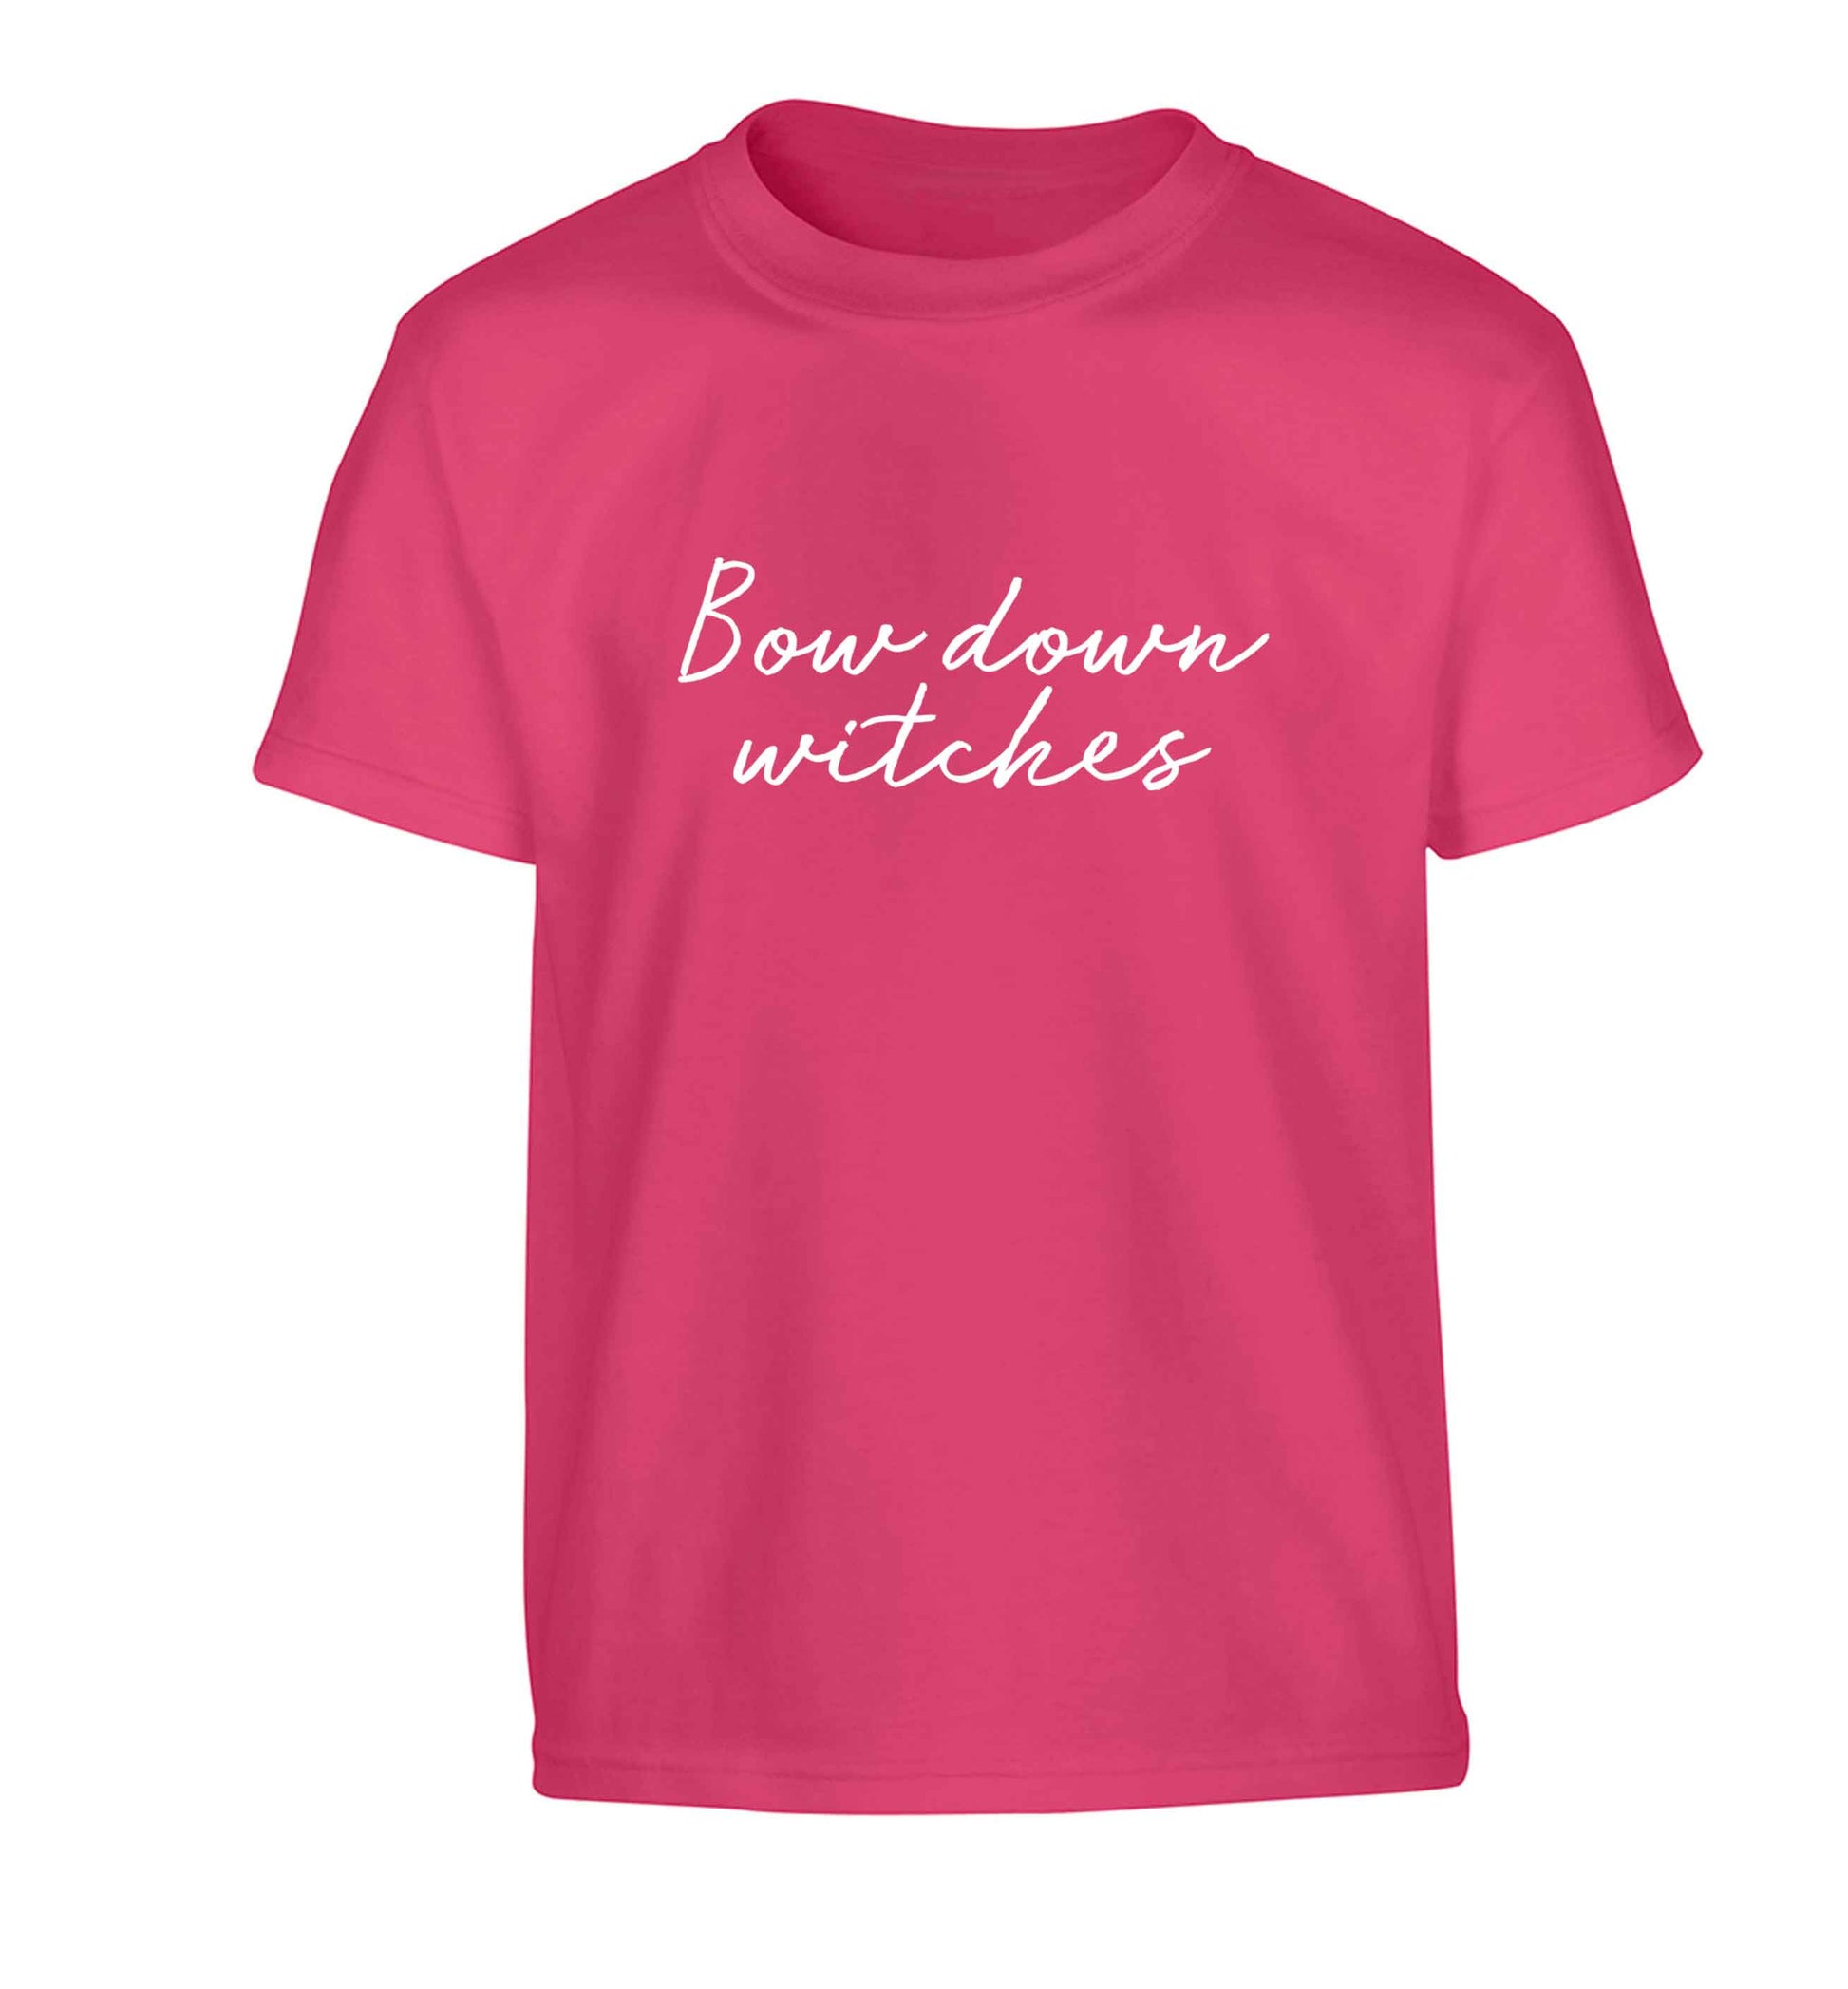 Bow down witches Children's pink Tshirt 12-13 Years